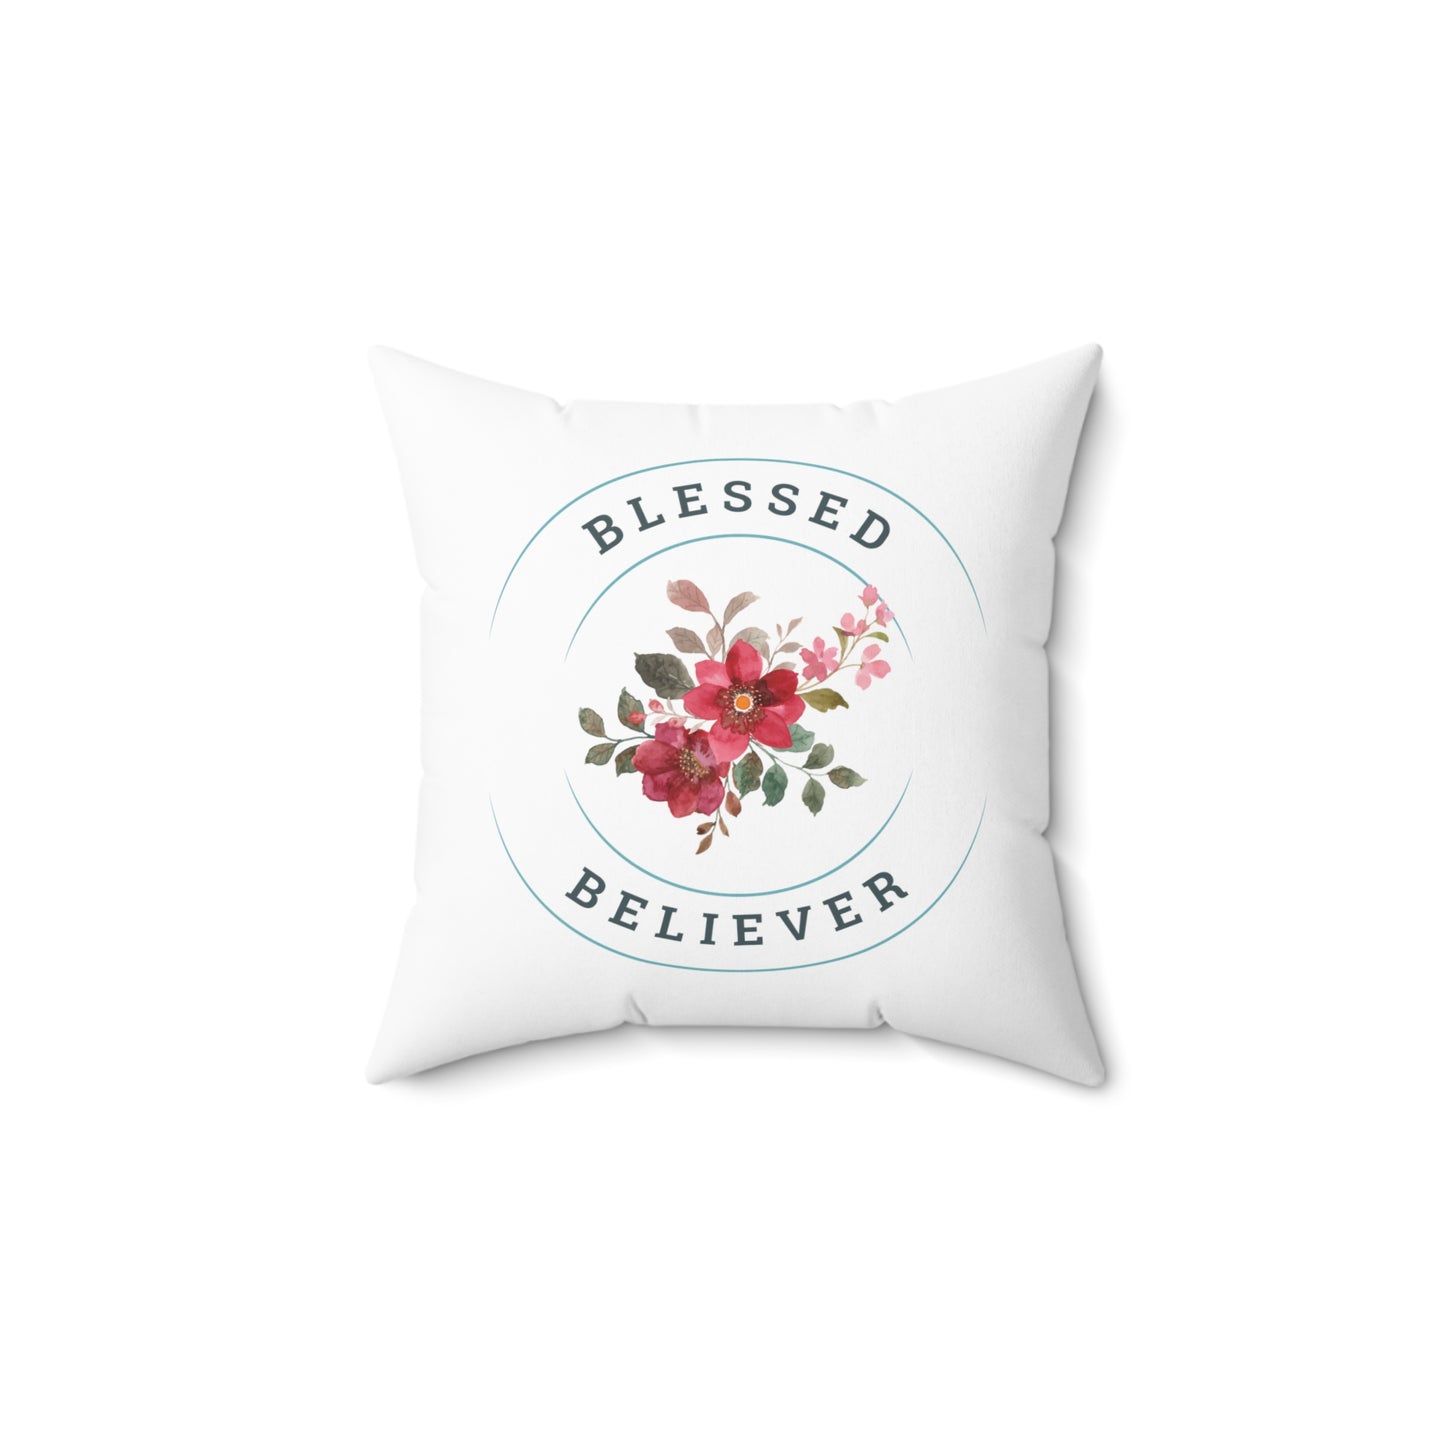 Blessed Believer, Spun Polyester Square Pillow